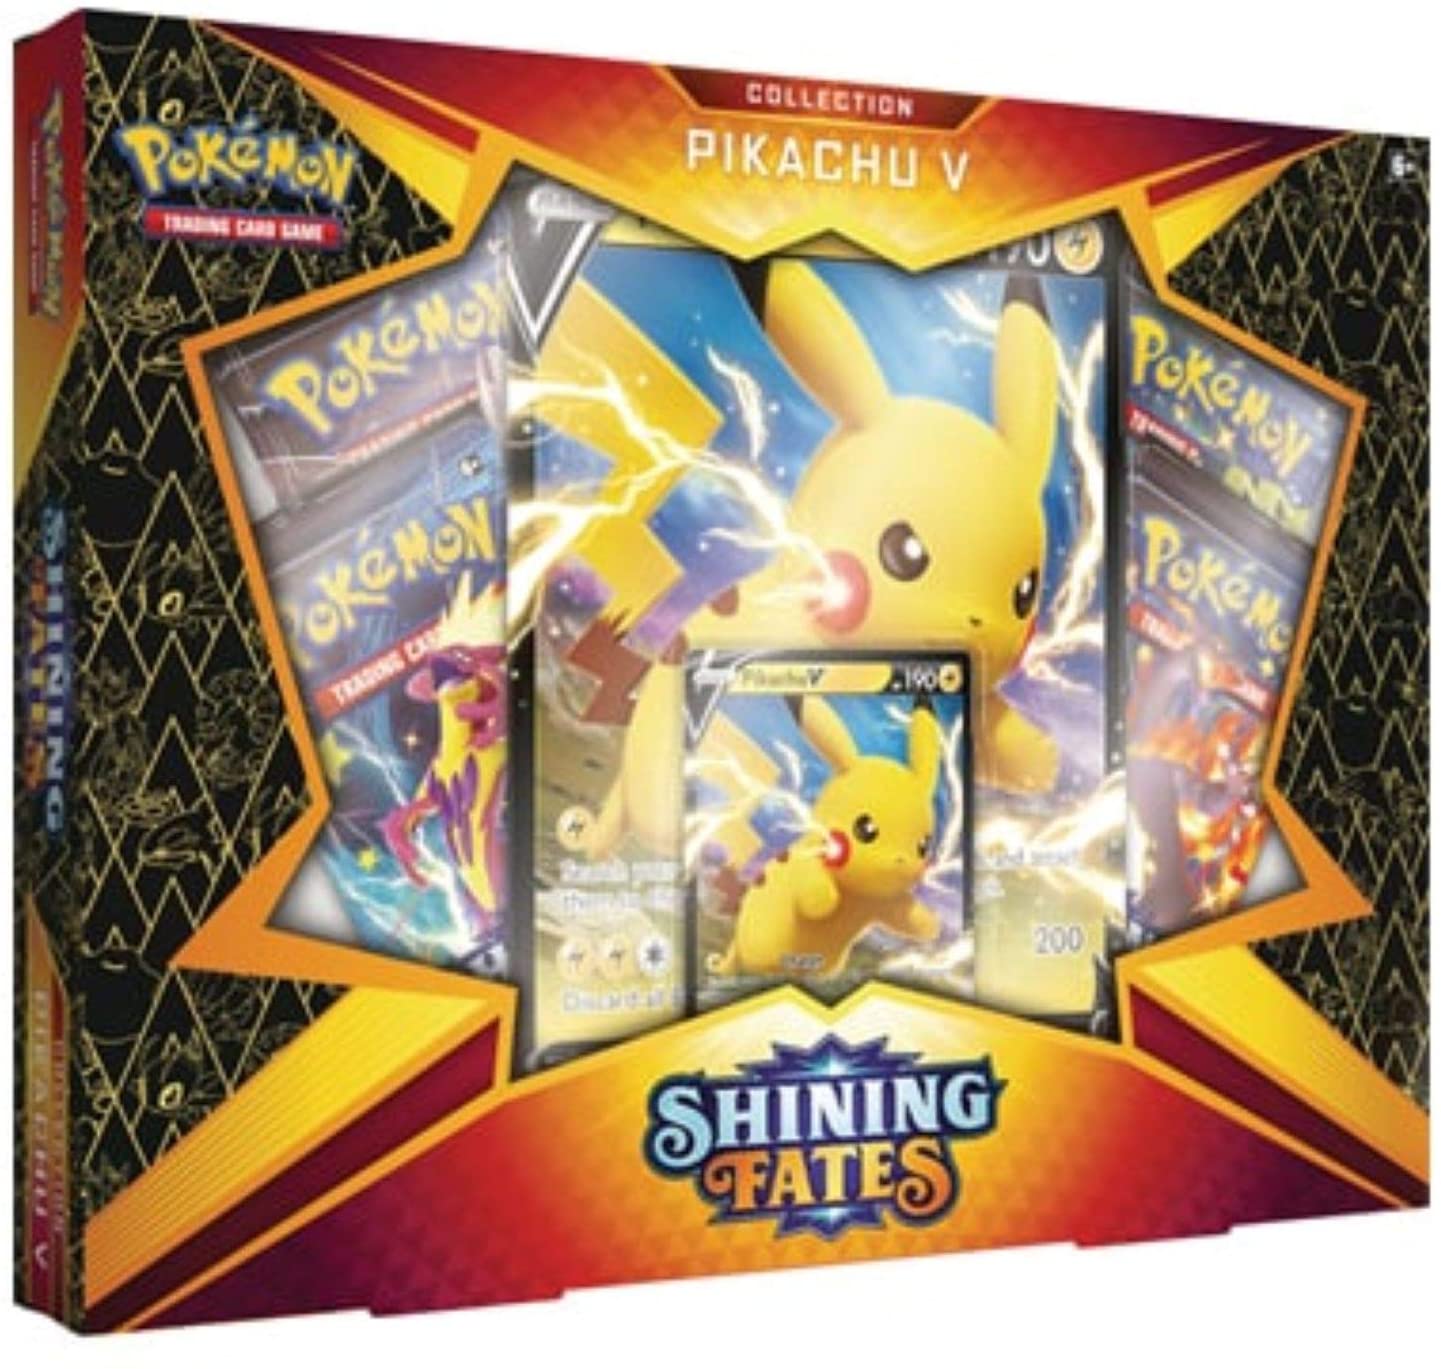 Shining fates Pikachu V Collection | D20 Games